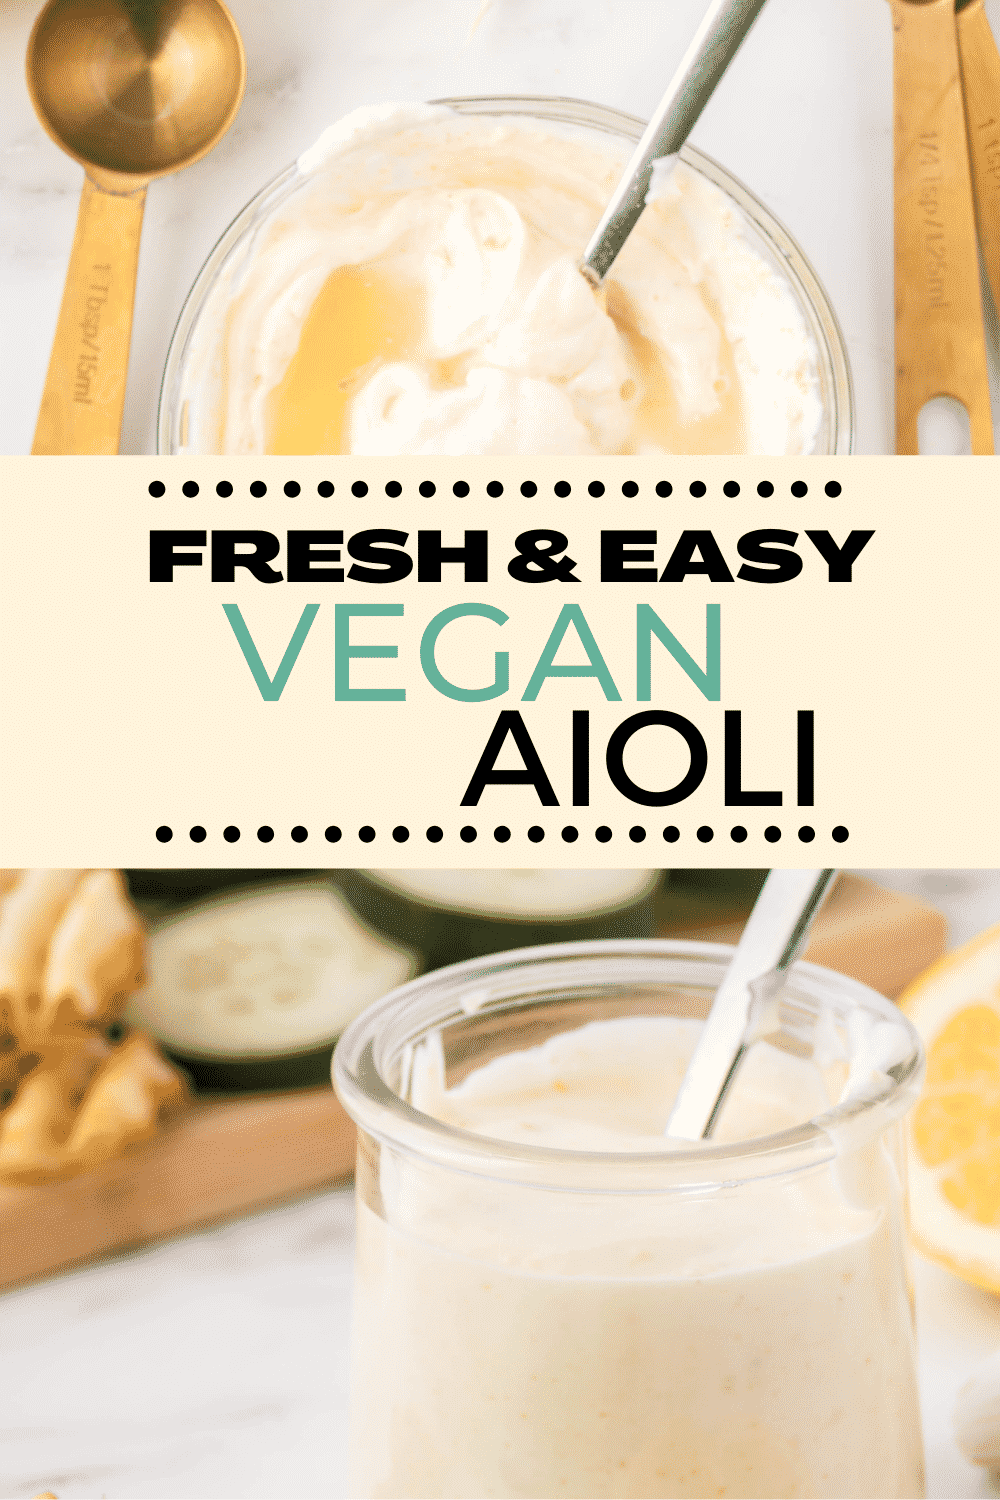 Vegan Aioli is the creamiest, easiest sauce ever! You only need 4 pantry staples to whip up this perfect spread or dip in just a few minutes. #vegansauce #aioli